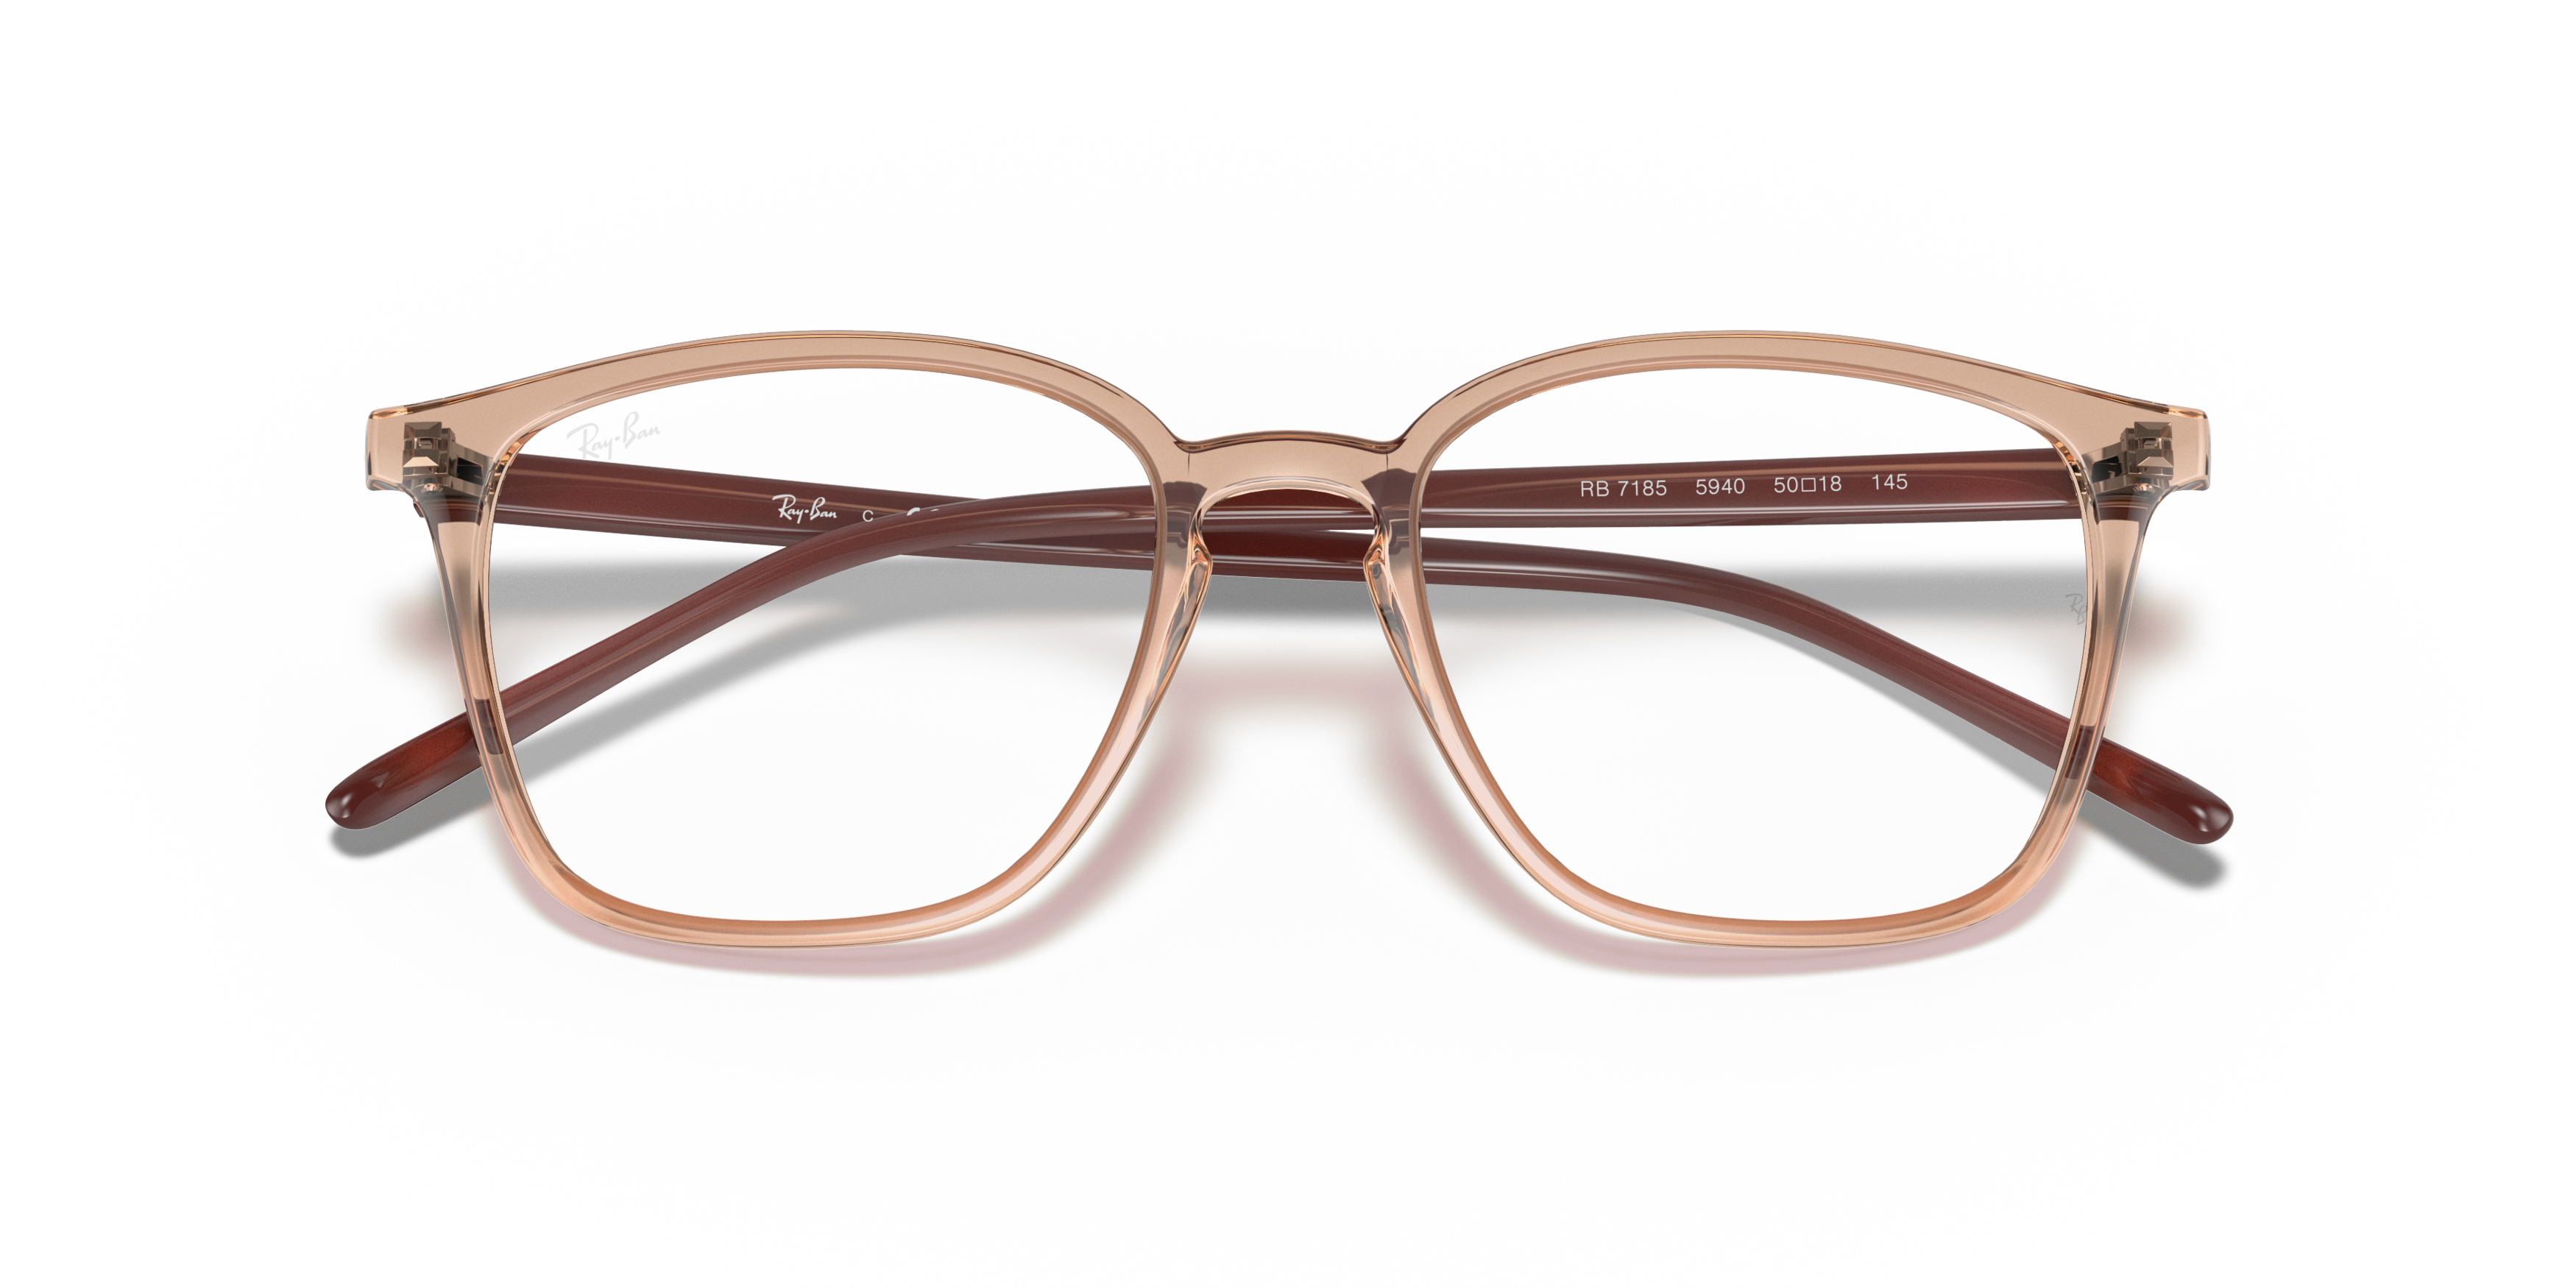 Folded Ray-Ban RX 7185 (5940) Glasses Transparent / Transparent, Brown